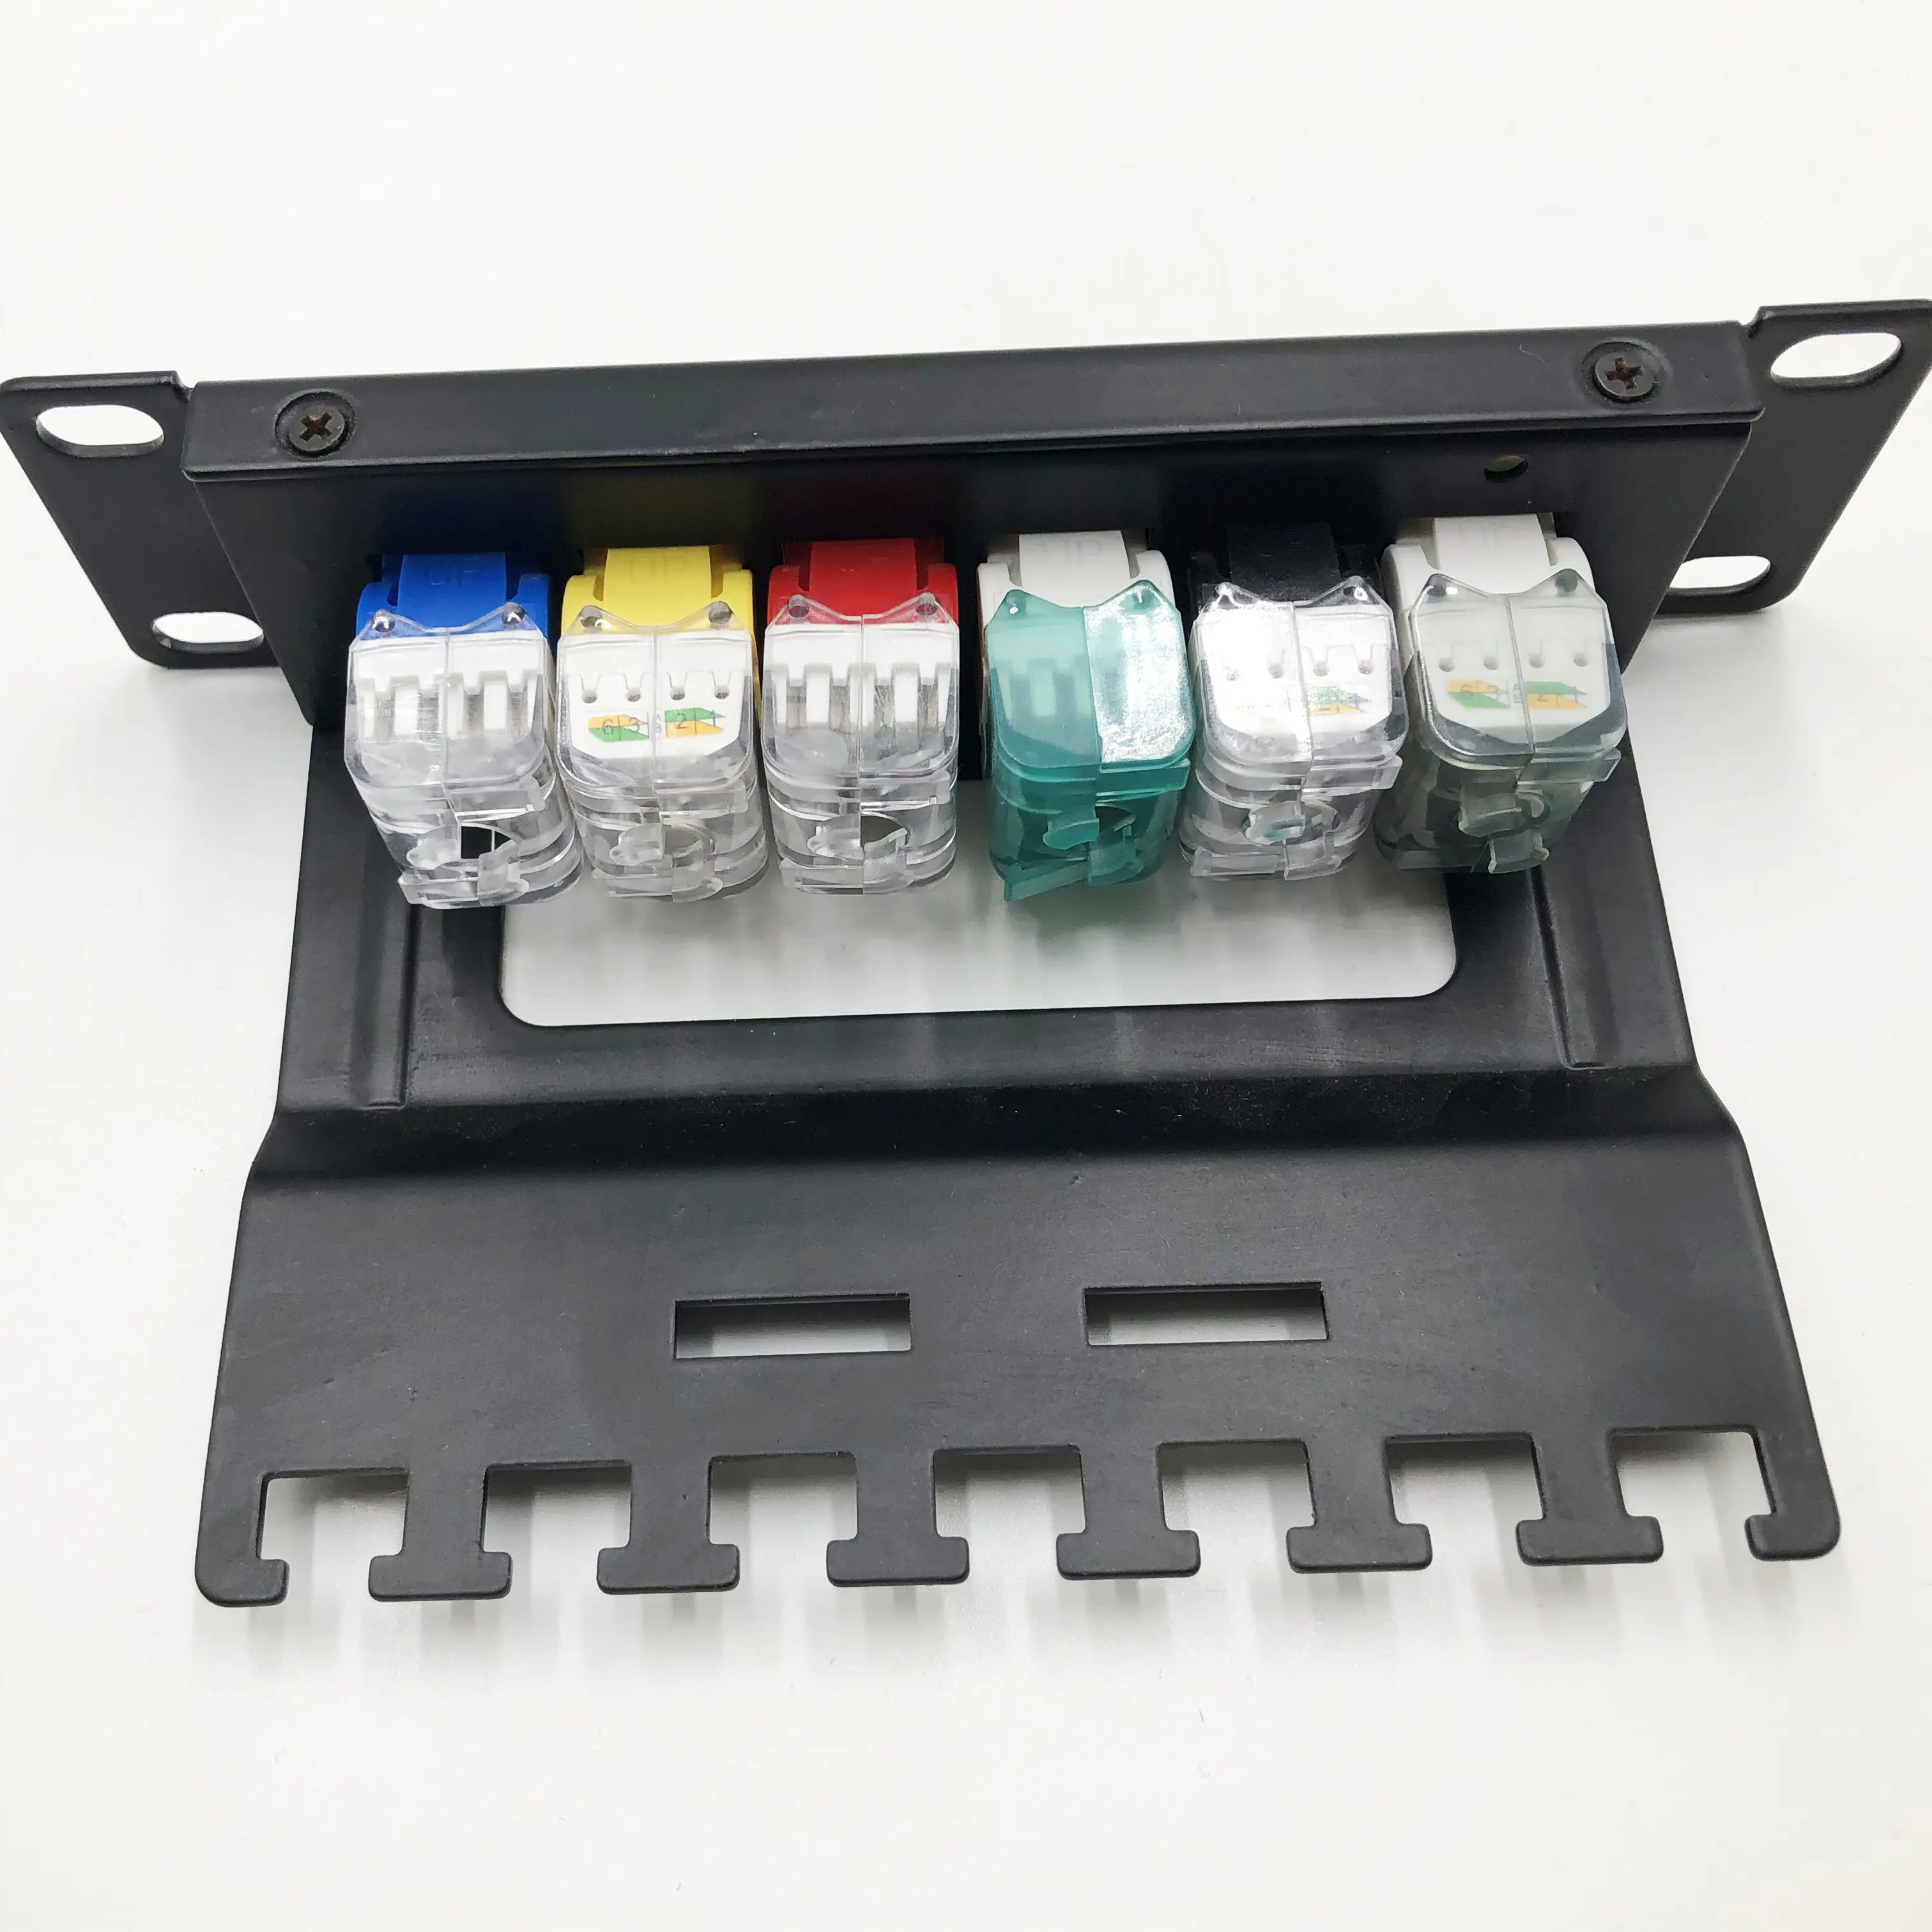 Factory 6 color indicator UTP blank patch panel with cable tie